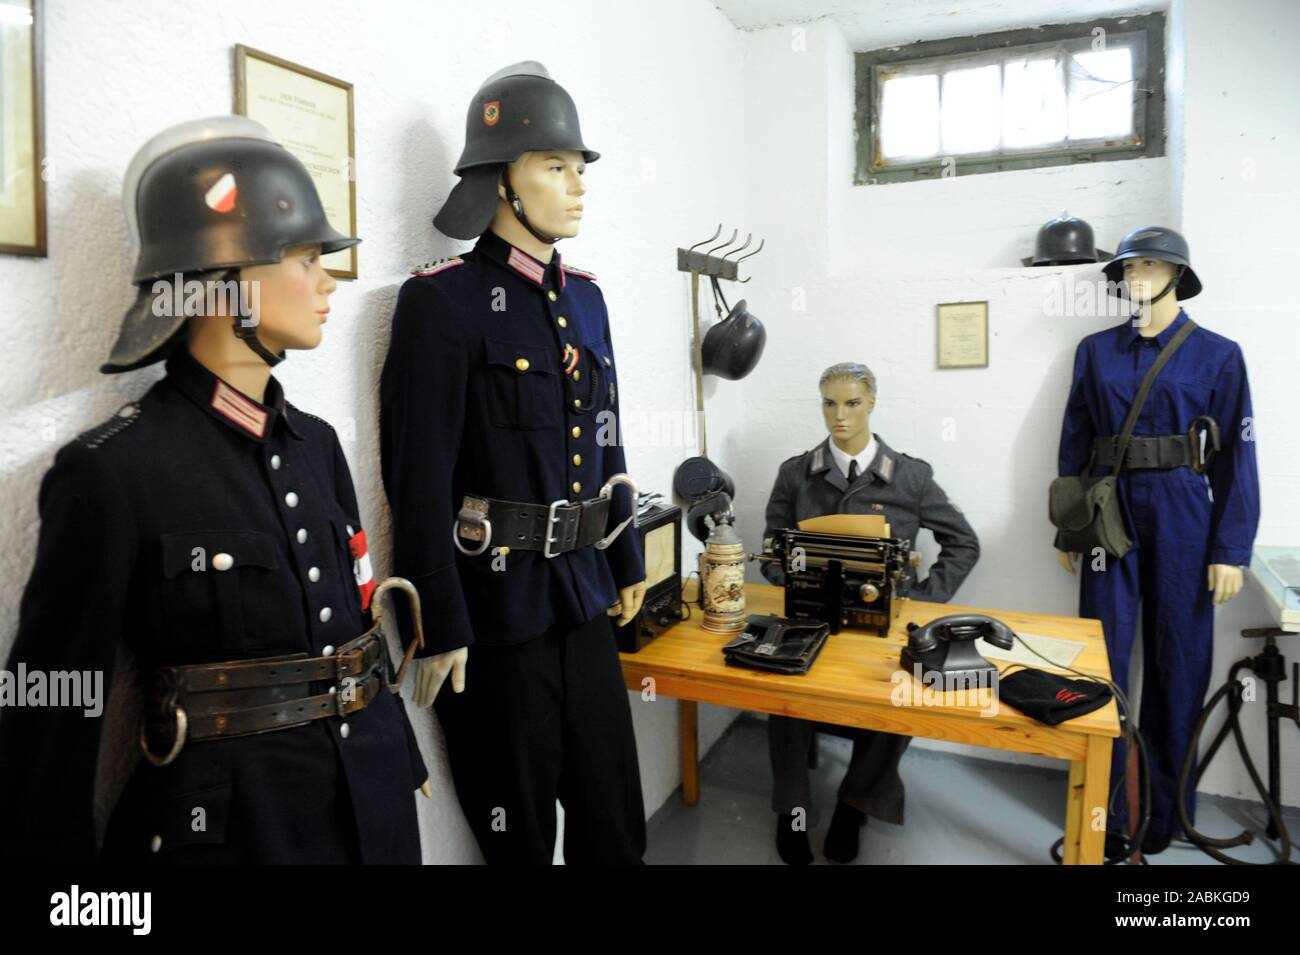 Andreas Abend's private fire brigade museum in his cellar. For years, this exhibition has been collecting exhibits on the 150-year history of the Munich volunteer fire brigade. [automated translation] Stock Photo